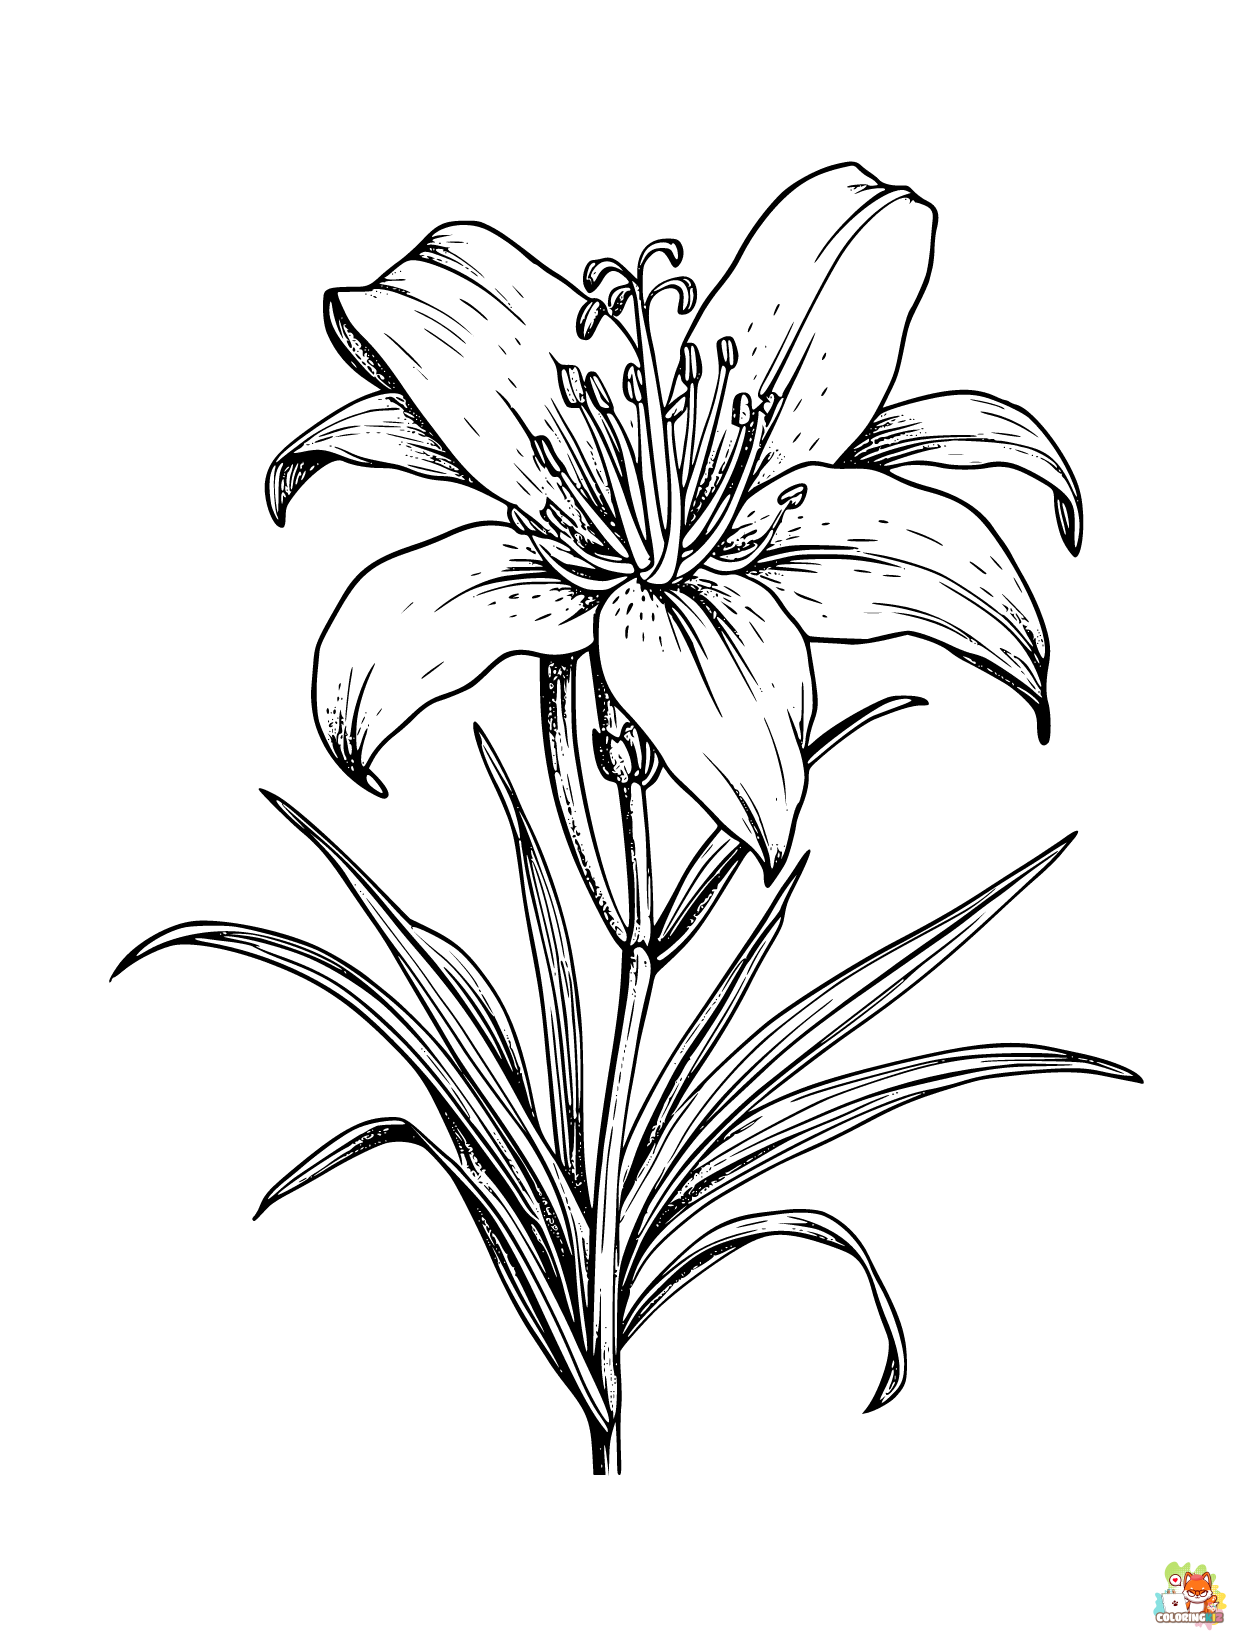 Printable desert lily coloring sheets